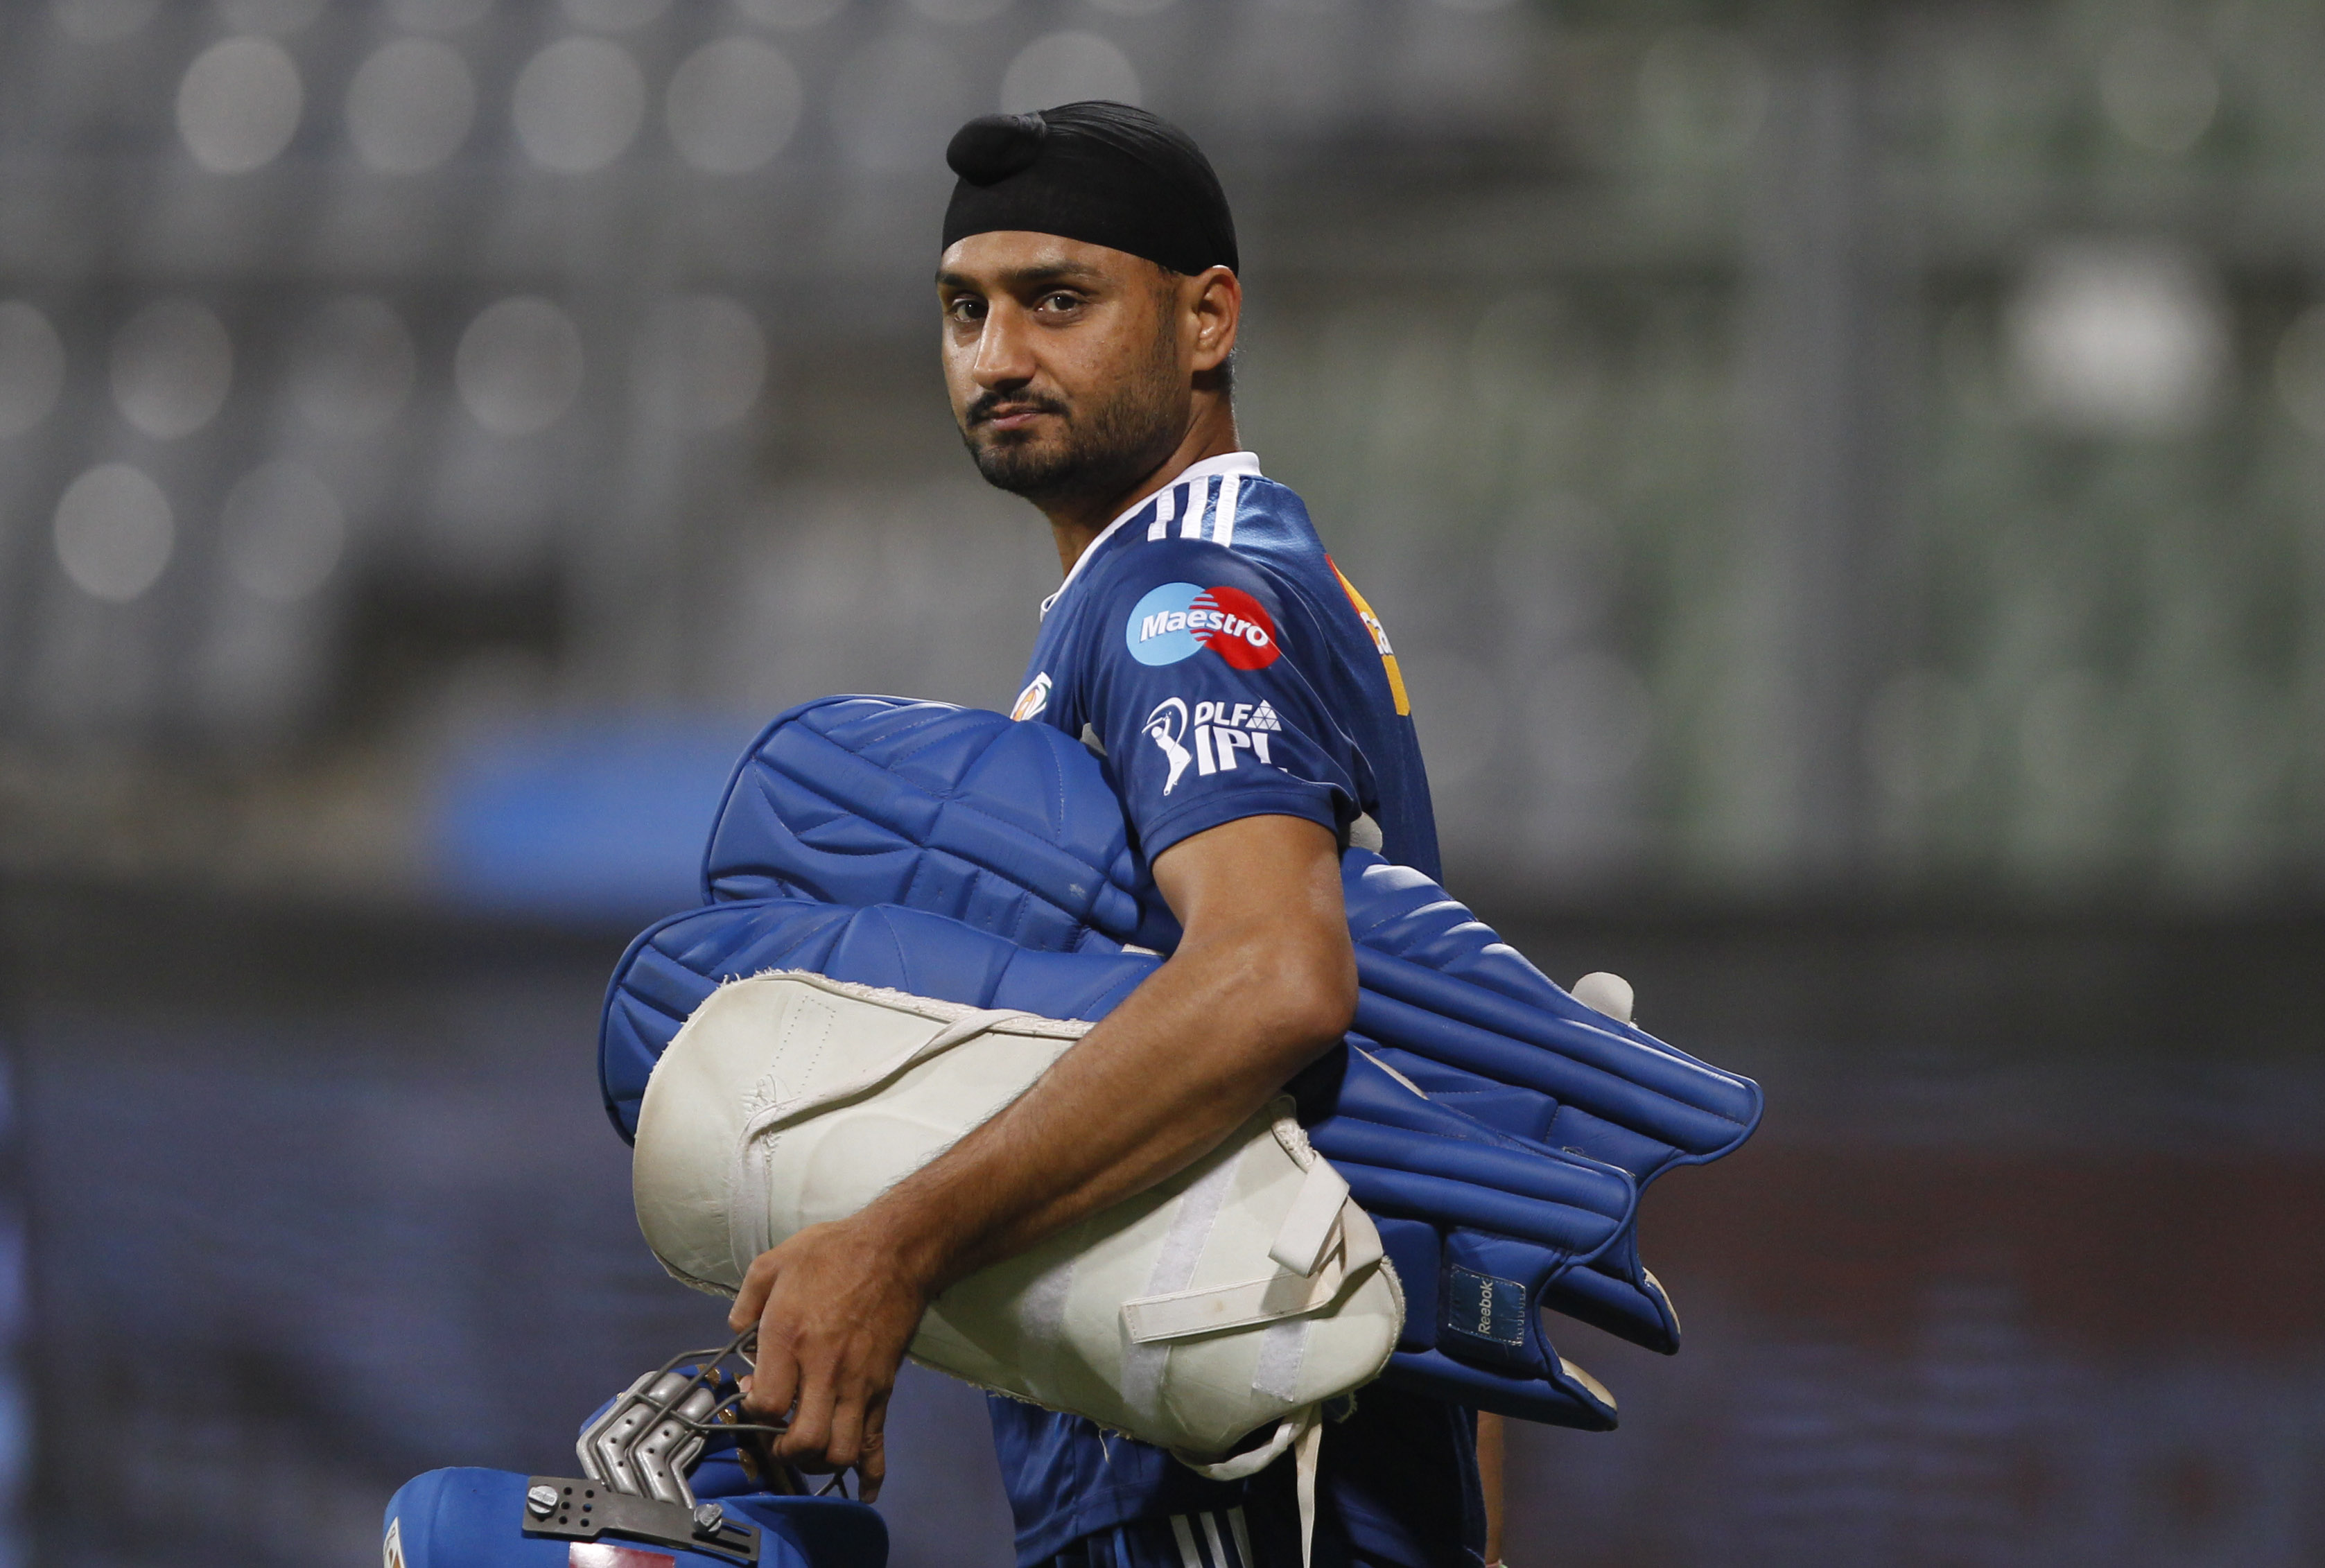 If I had to correct one mistake, it would be how I treated S Sreesanth, says Harbhajan Singh about slapgate incident